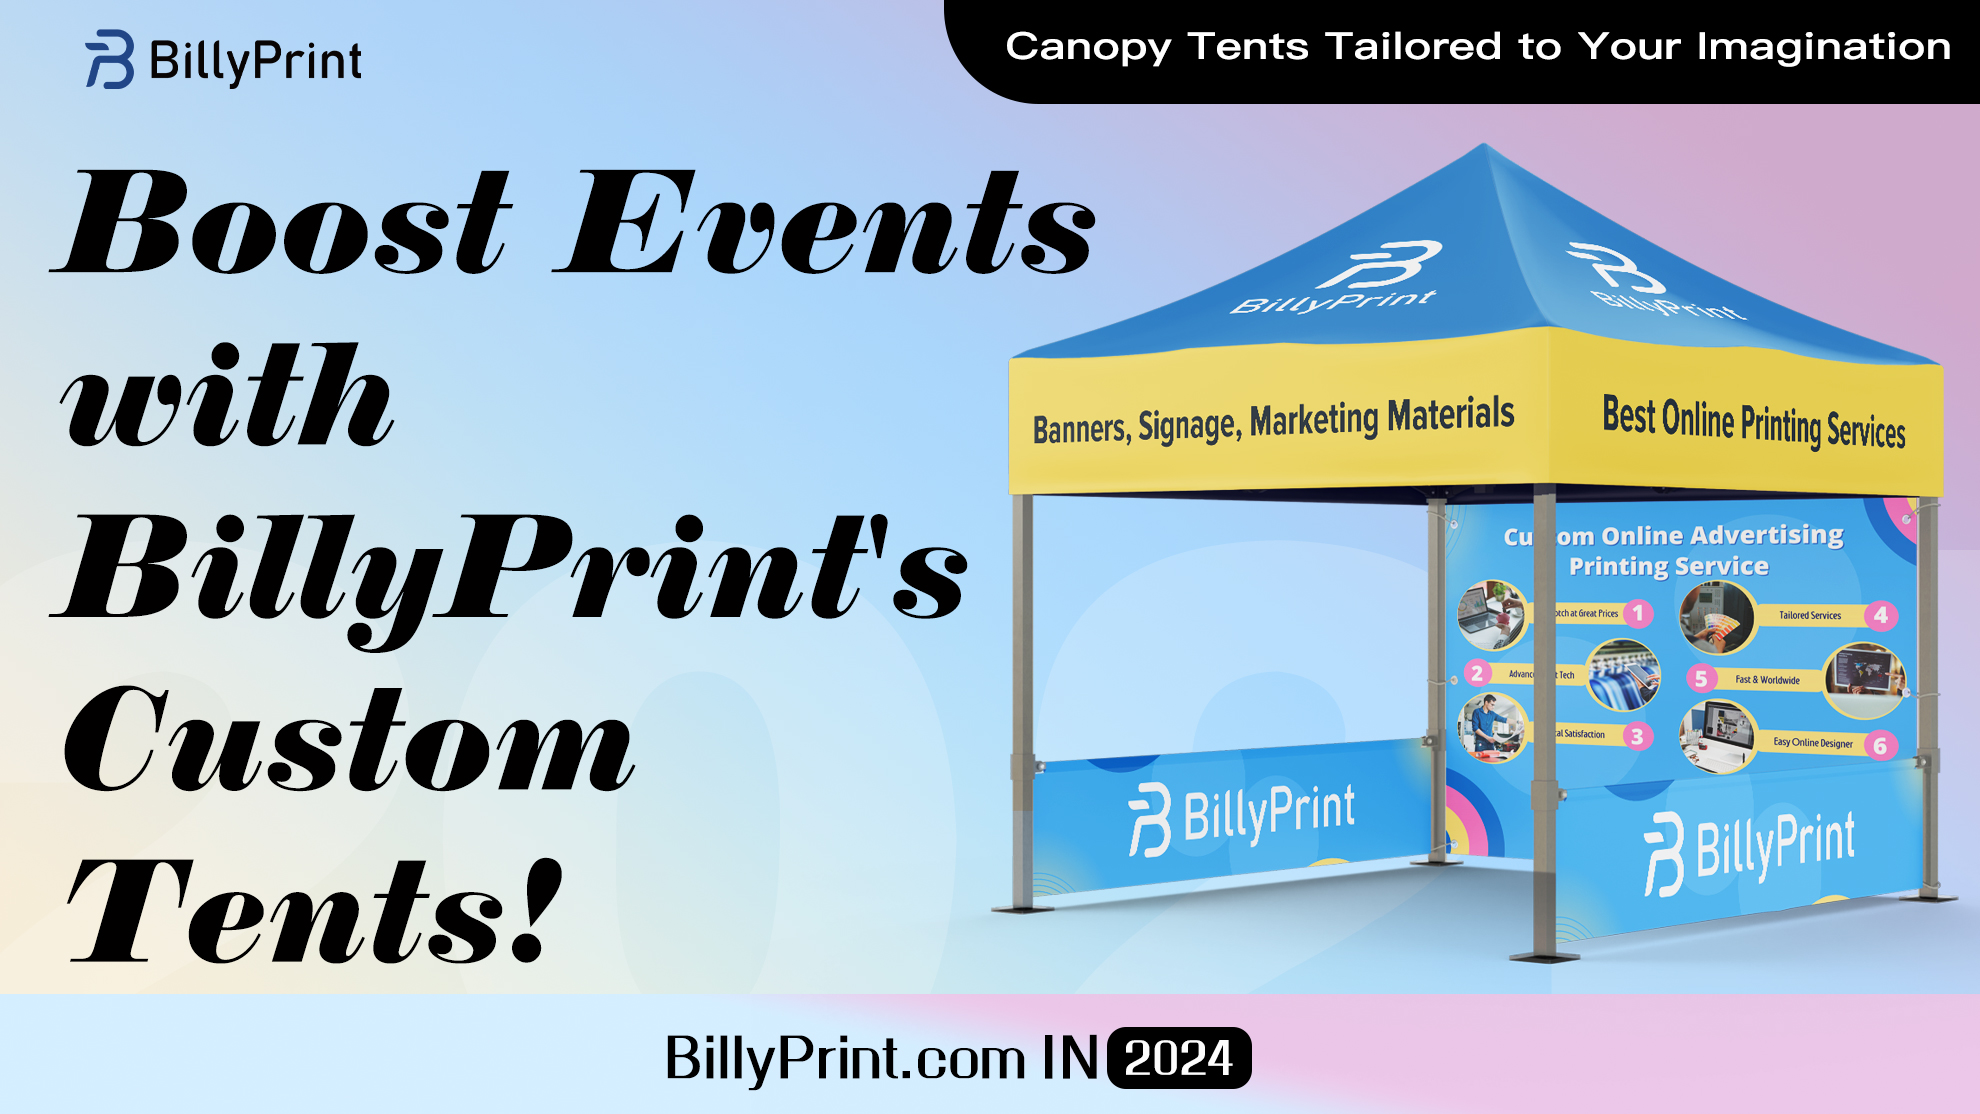 Discover 5 Essential Canopy Tents Tips with BillyPrint: Perfect for Any Event!